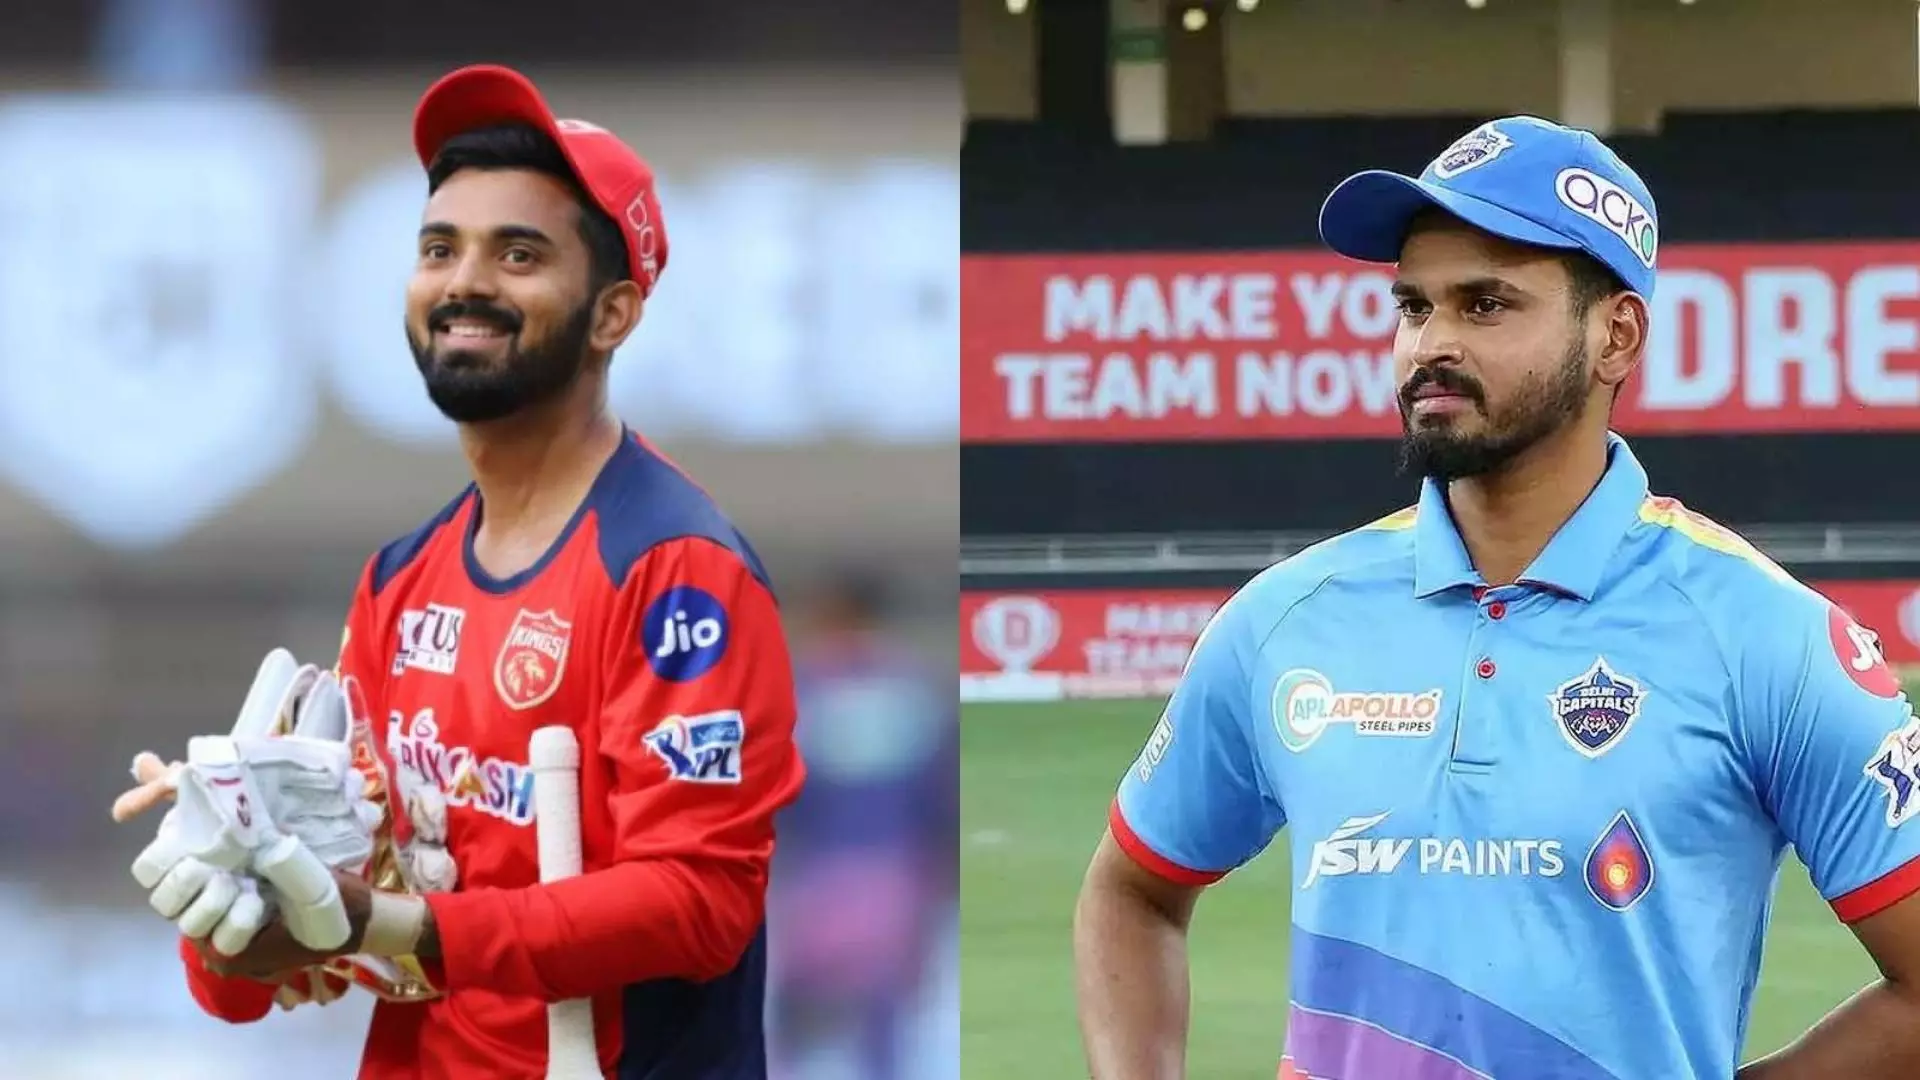 Royal Challengers Bangalore Team Management Planning to Replace The Captaincy With Shreyas Iyer or KL Rahul